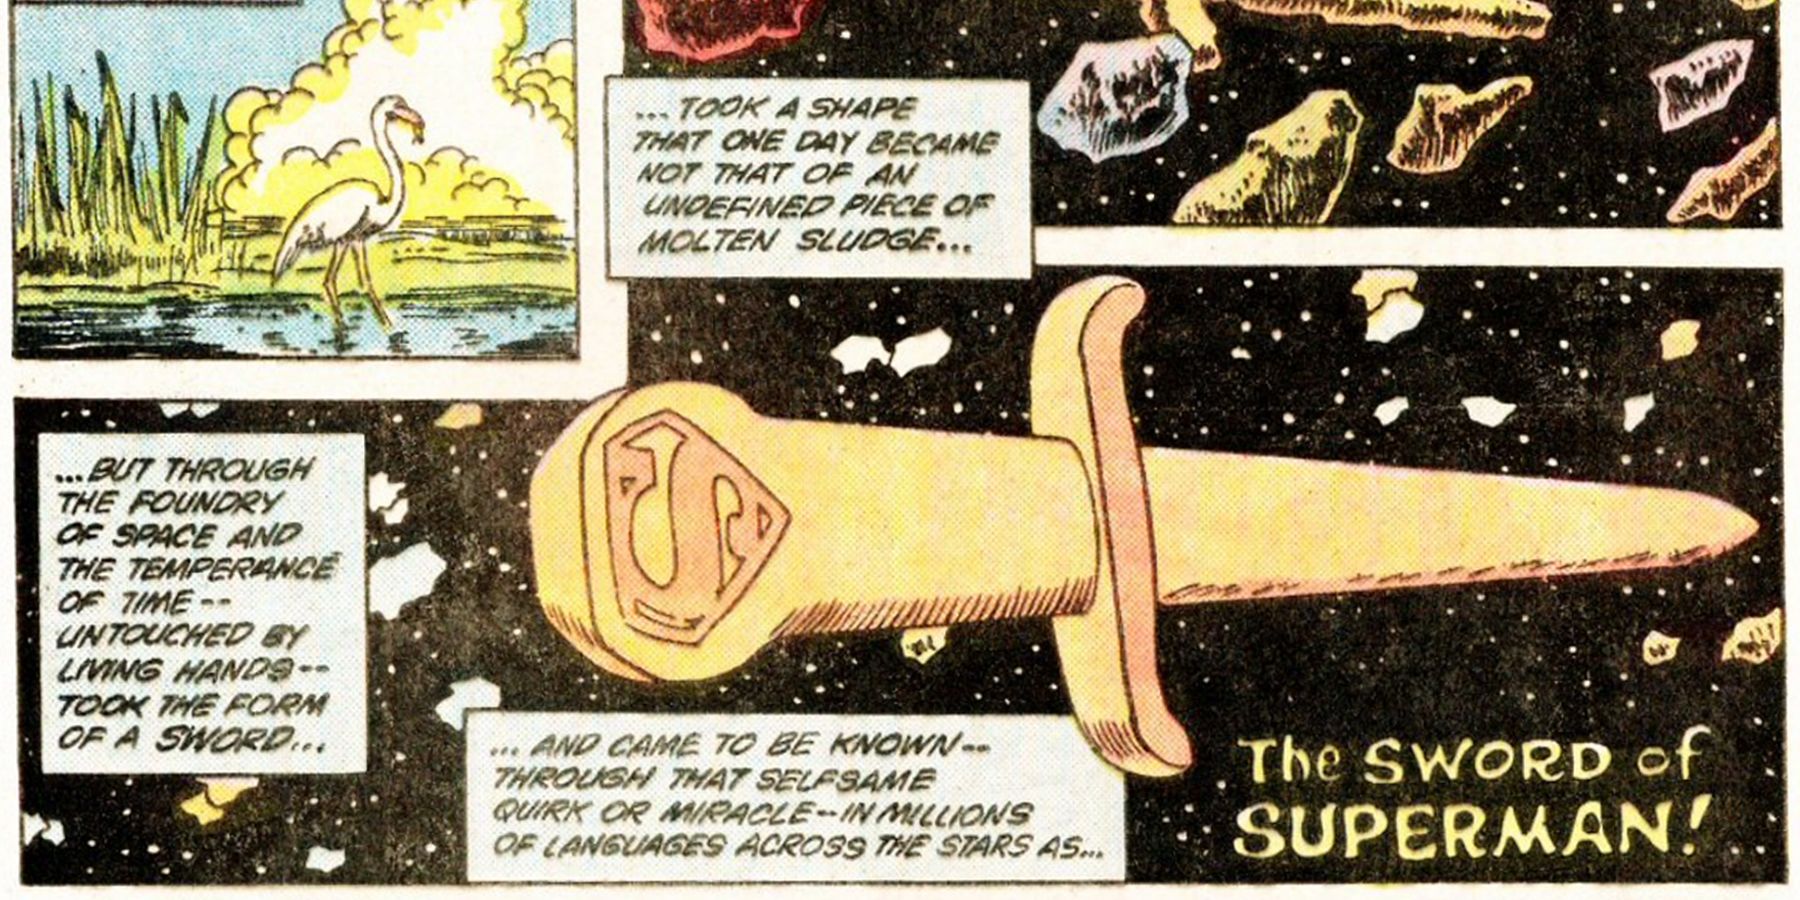 The Sword of Superman Floats Through Space